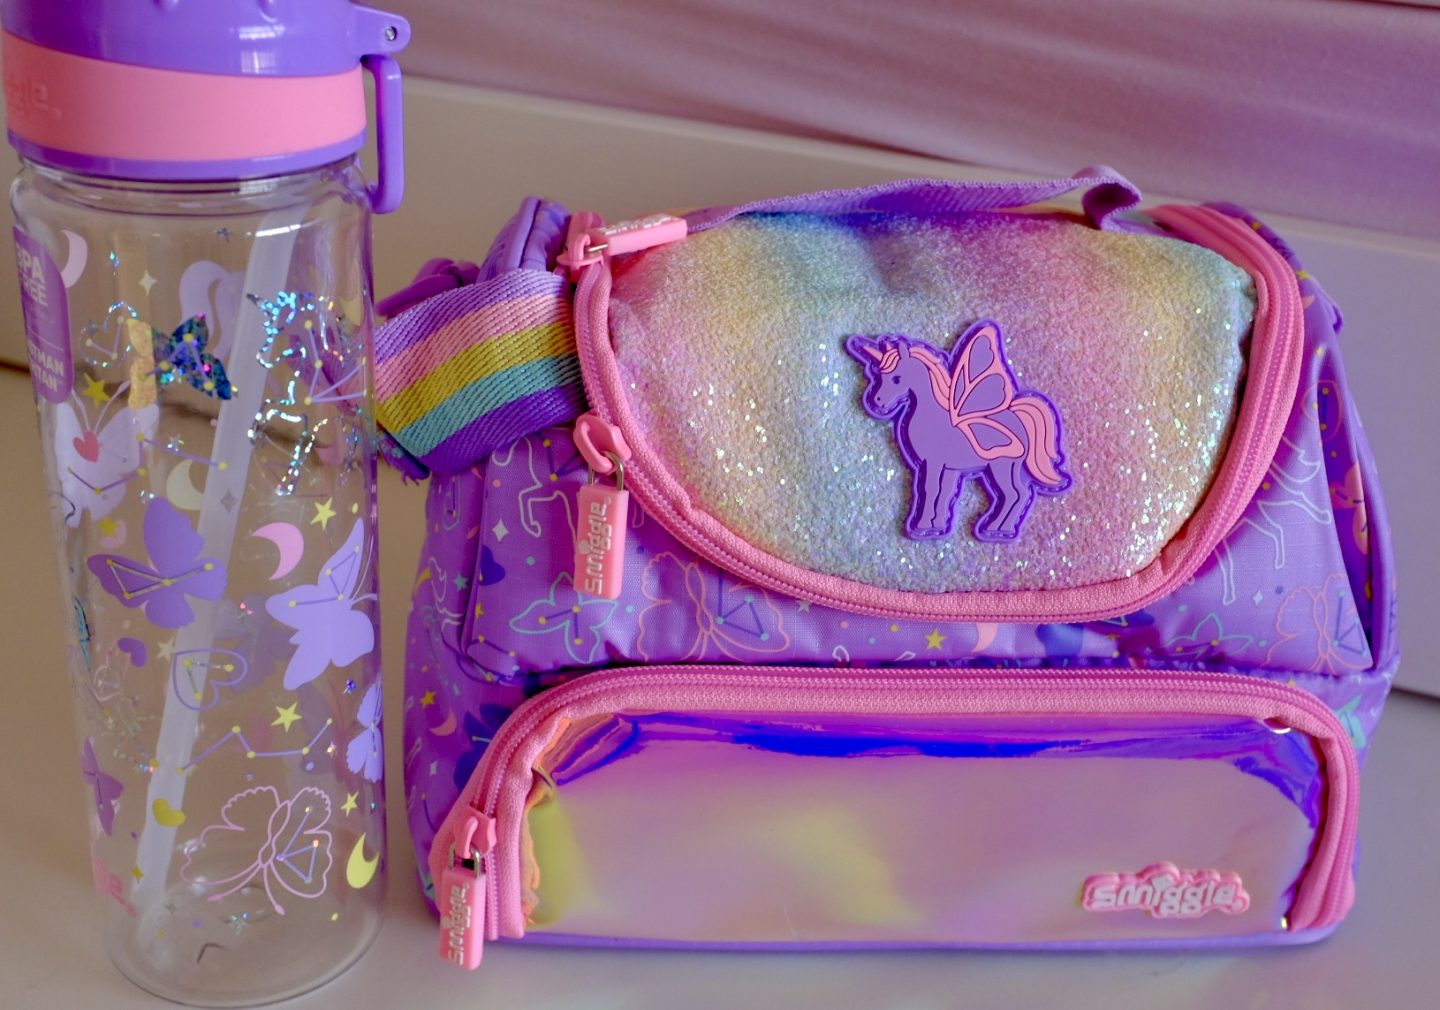 Smiggle Unicorn Lilac Backpack - Sky Collection